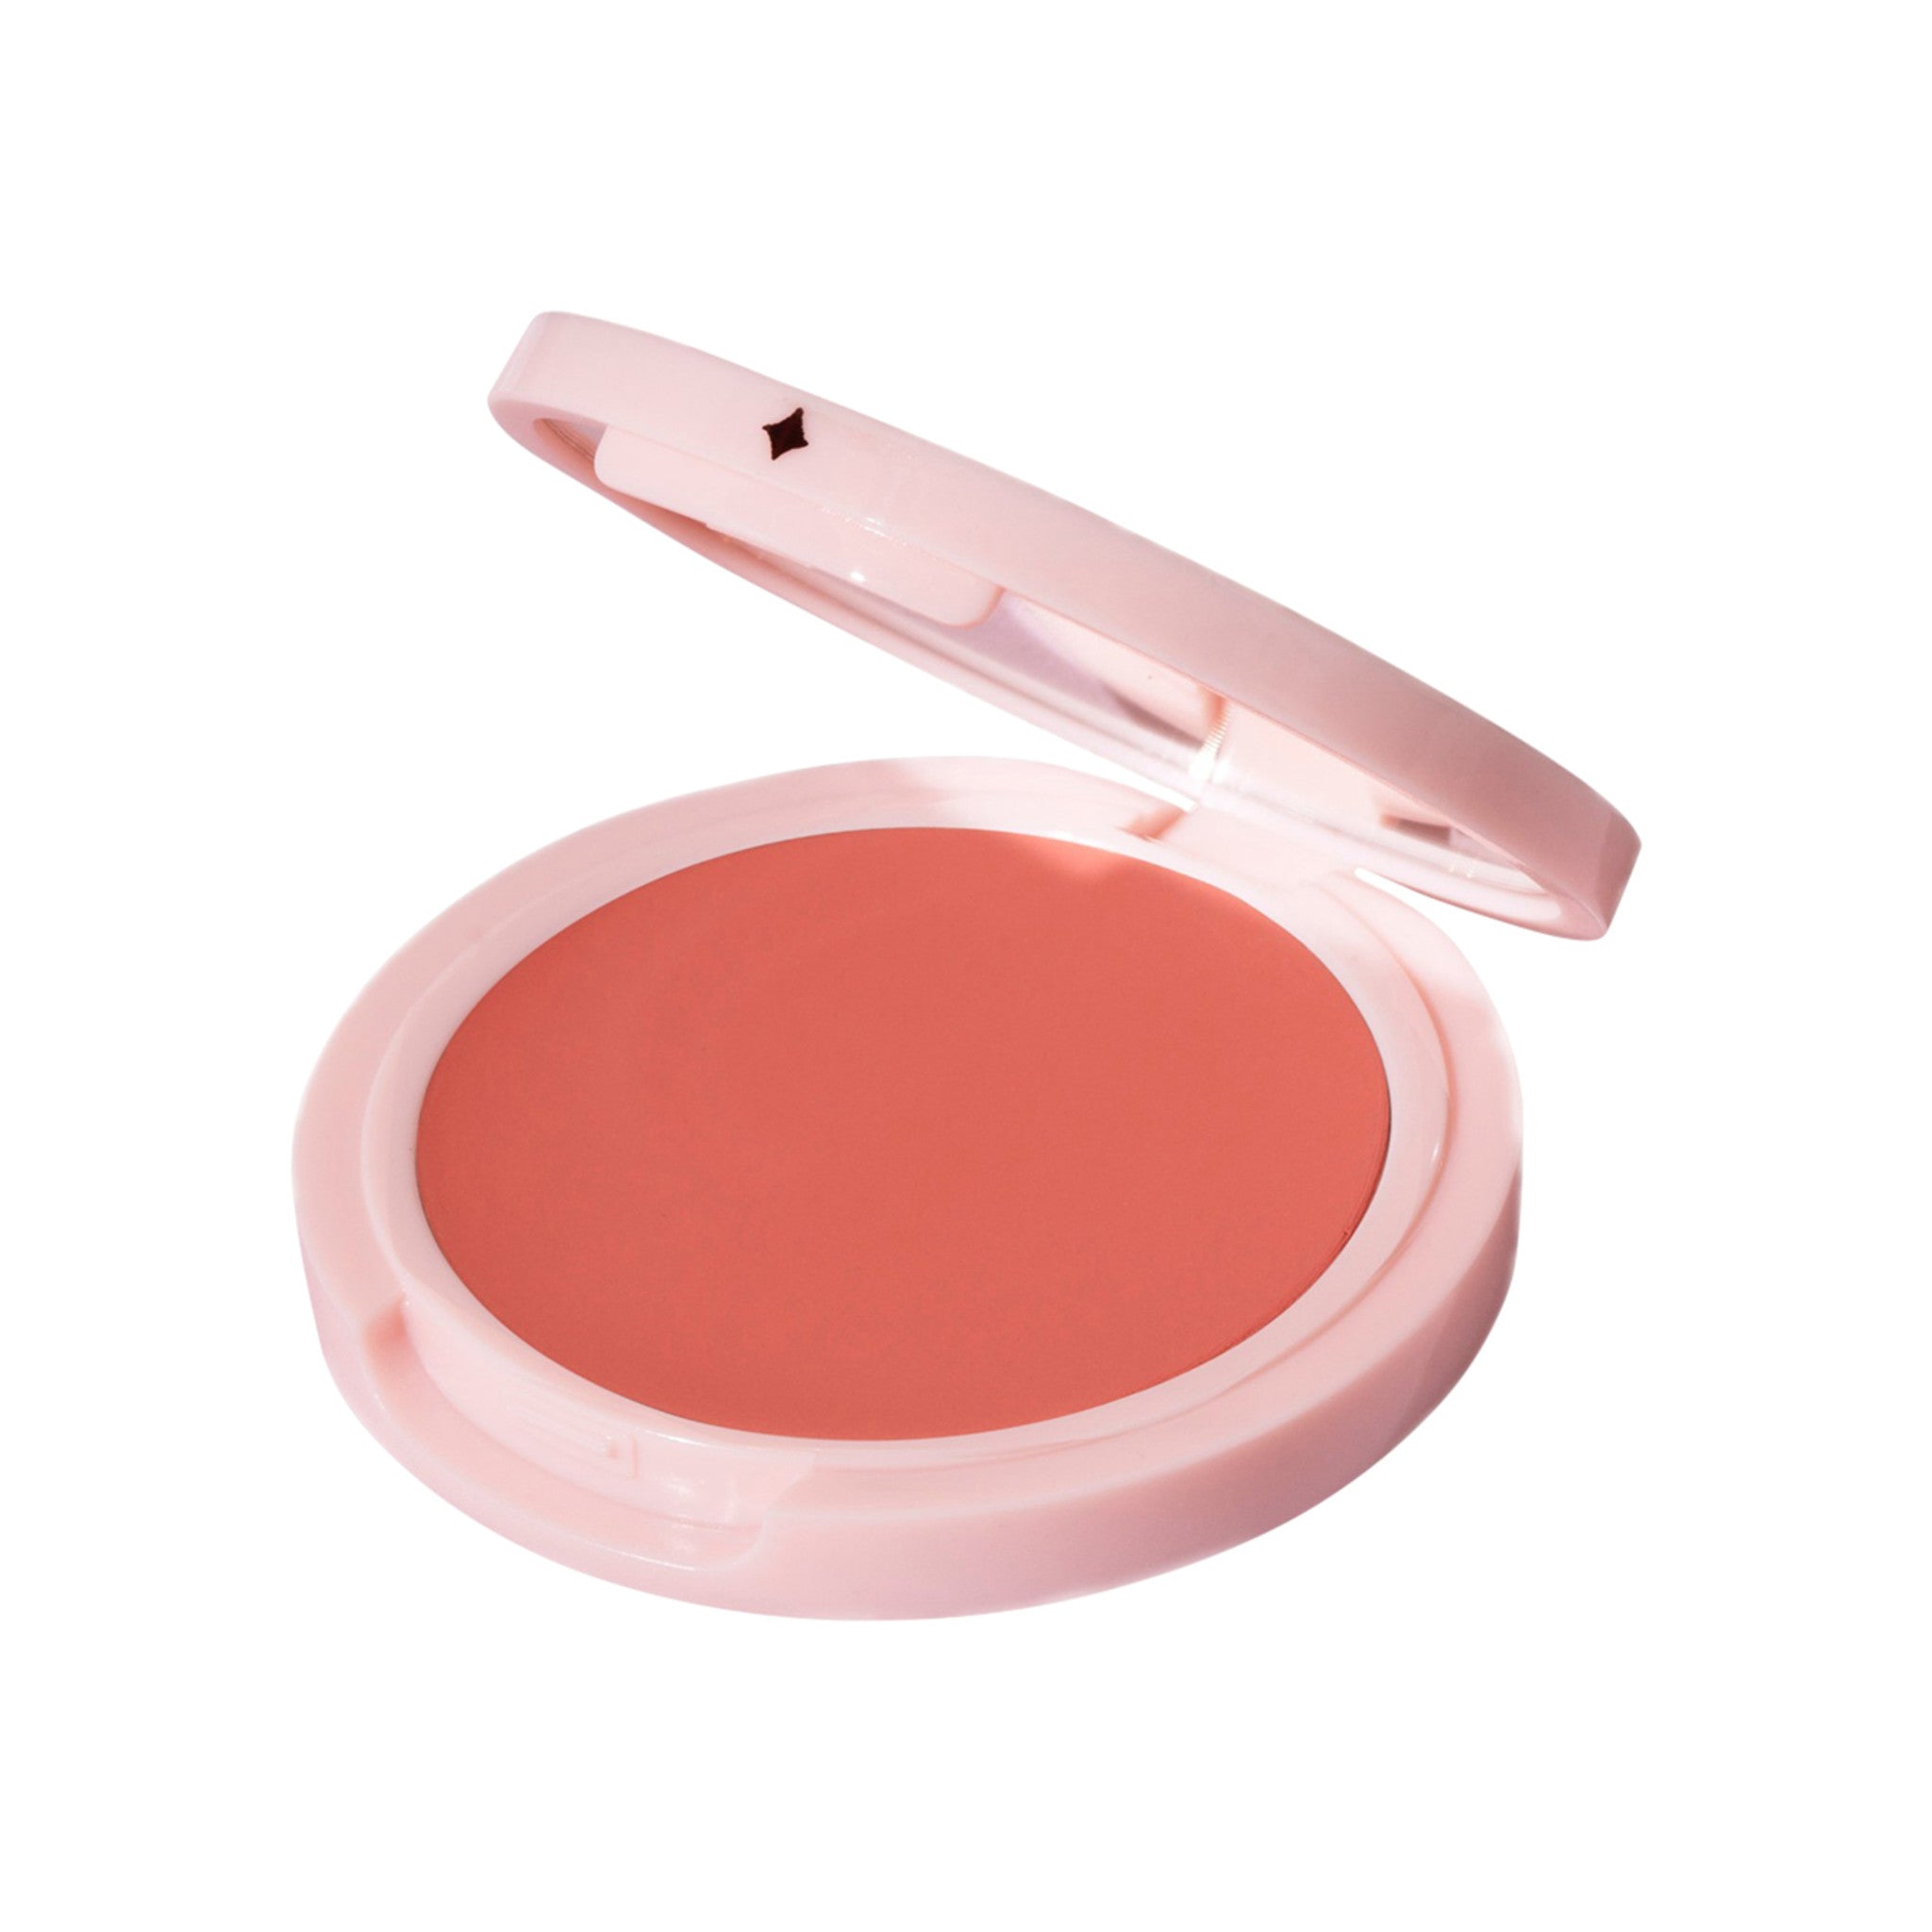 Jillian Dempsey Cheek Tint Color/Shade variant: Petal main image. This product is in the color coral